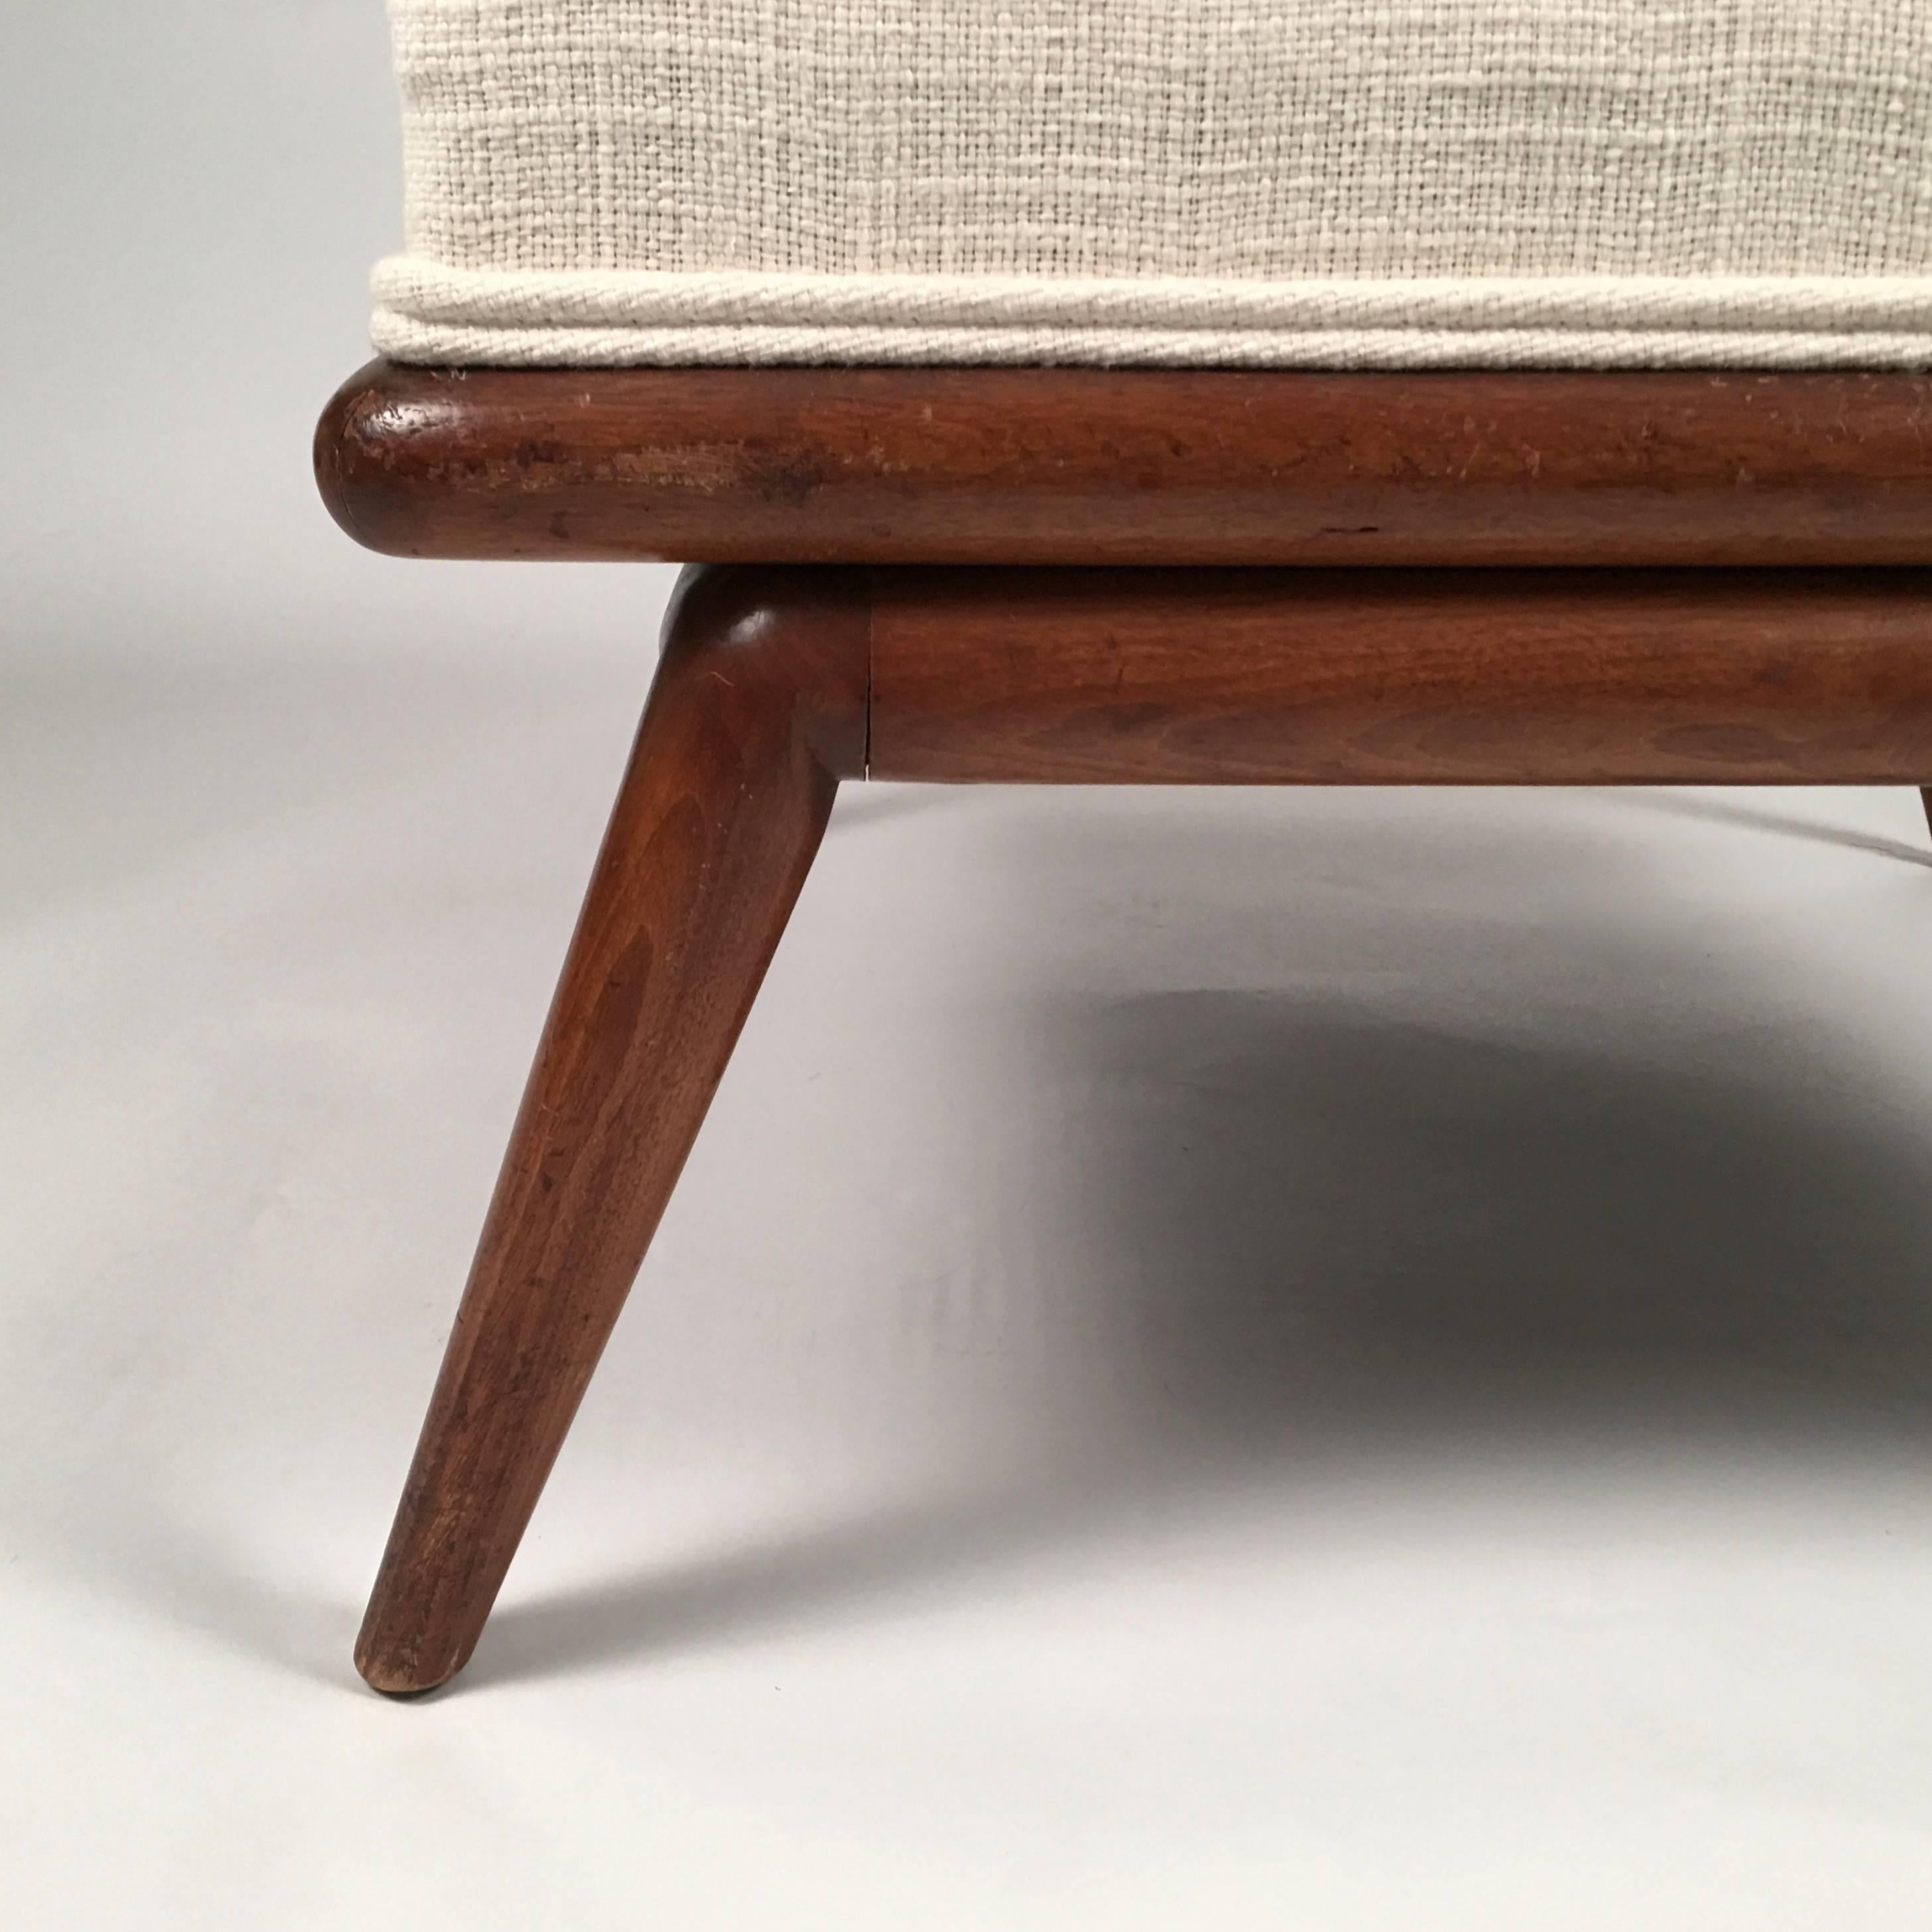 A  beautifully made mid-century modern upholstered square ottoman with angled cylindrical carved walnut legs, designed by T.H. Robsjohn-Gibbings and made by Widdicomb, Grand Rapids, Michigan, circa, 1950. Characteristic blend of classical form and